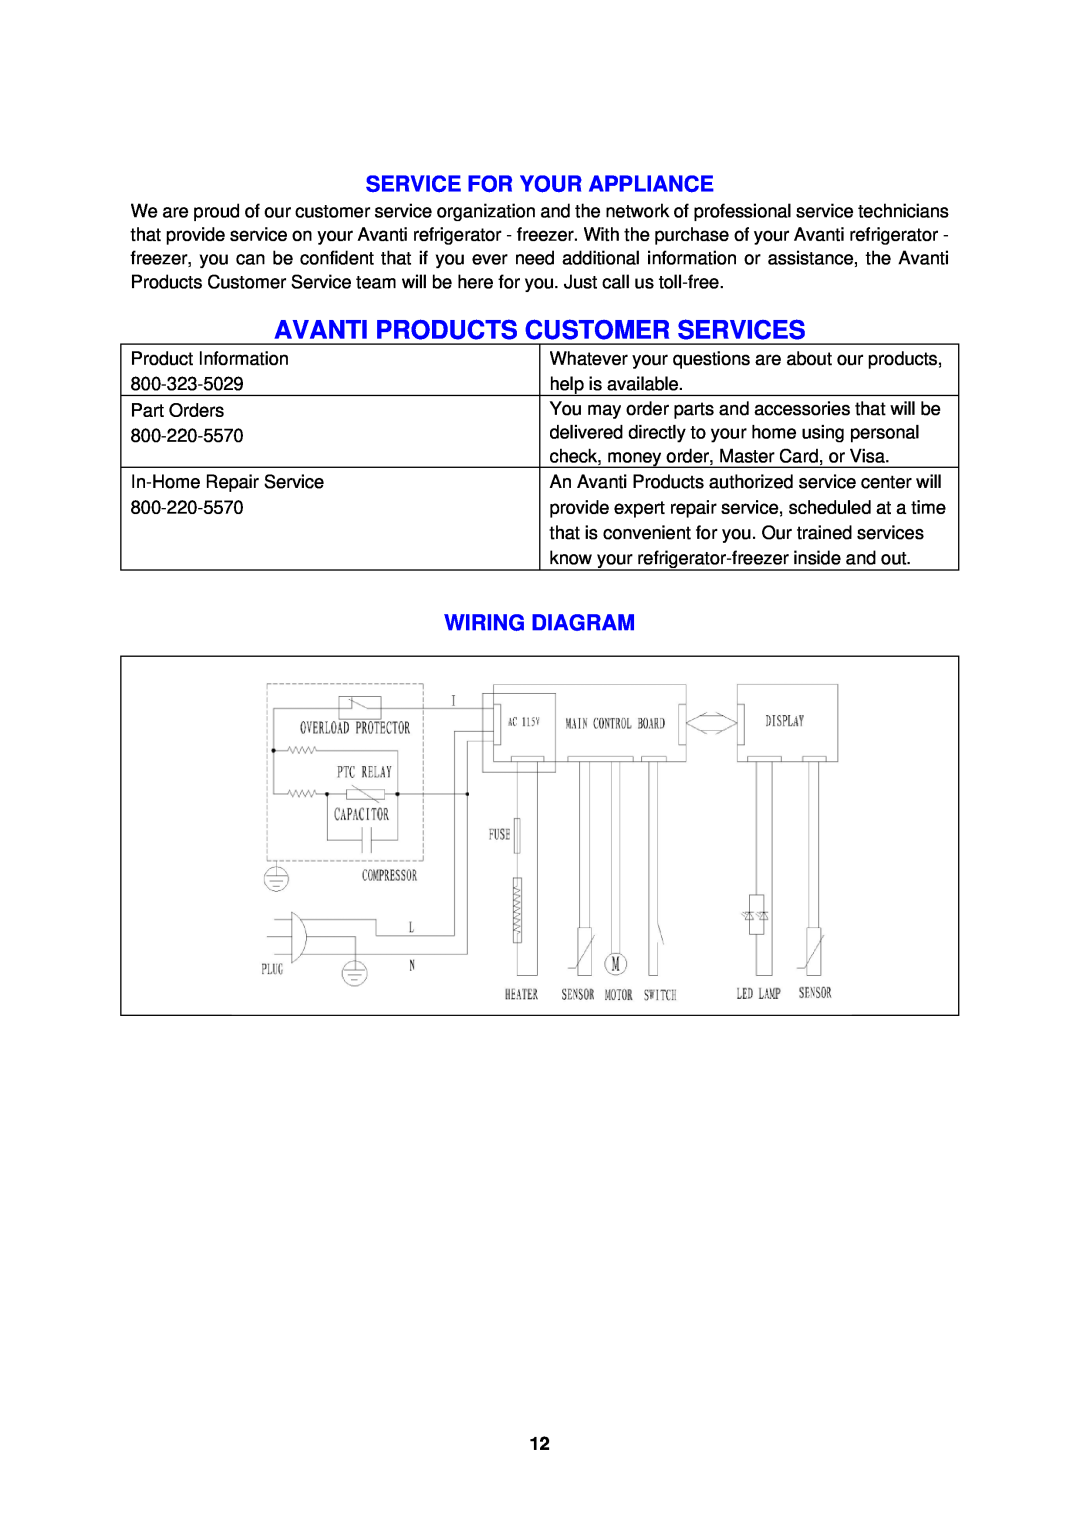 Avanti FF1212W, FF1213PS instruction manual Service For Your Appliance, Wiring Diagram, Avanti Products Customer Services 